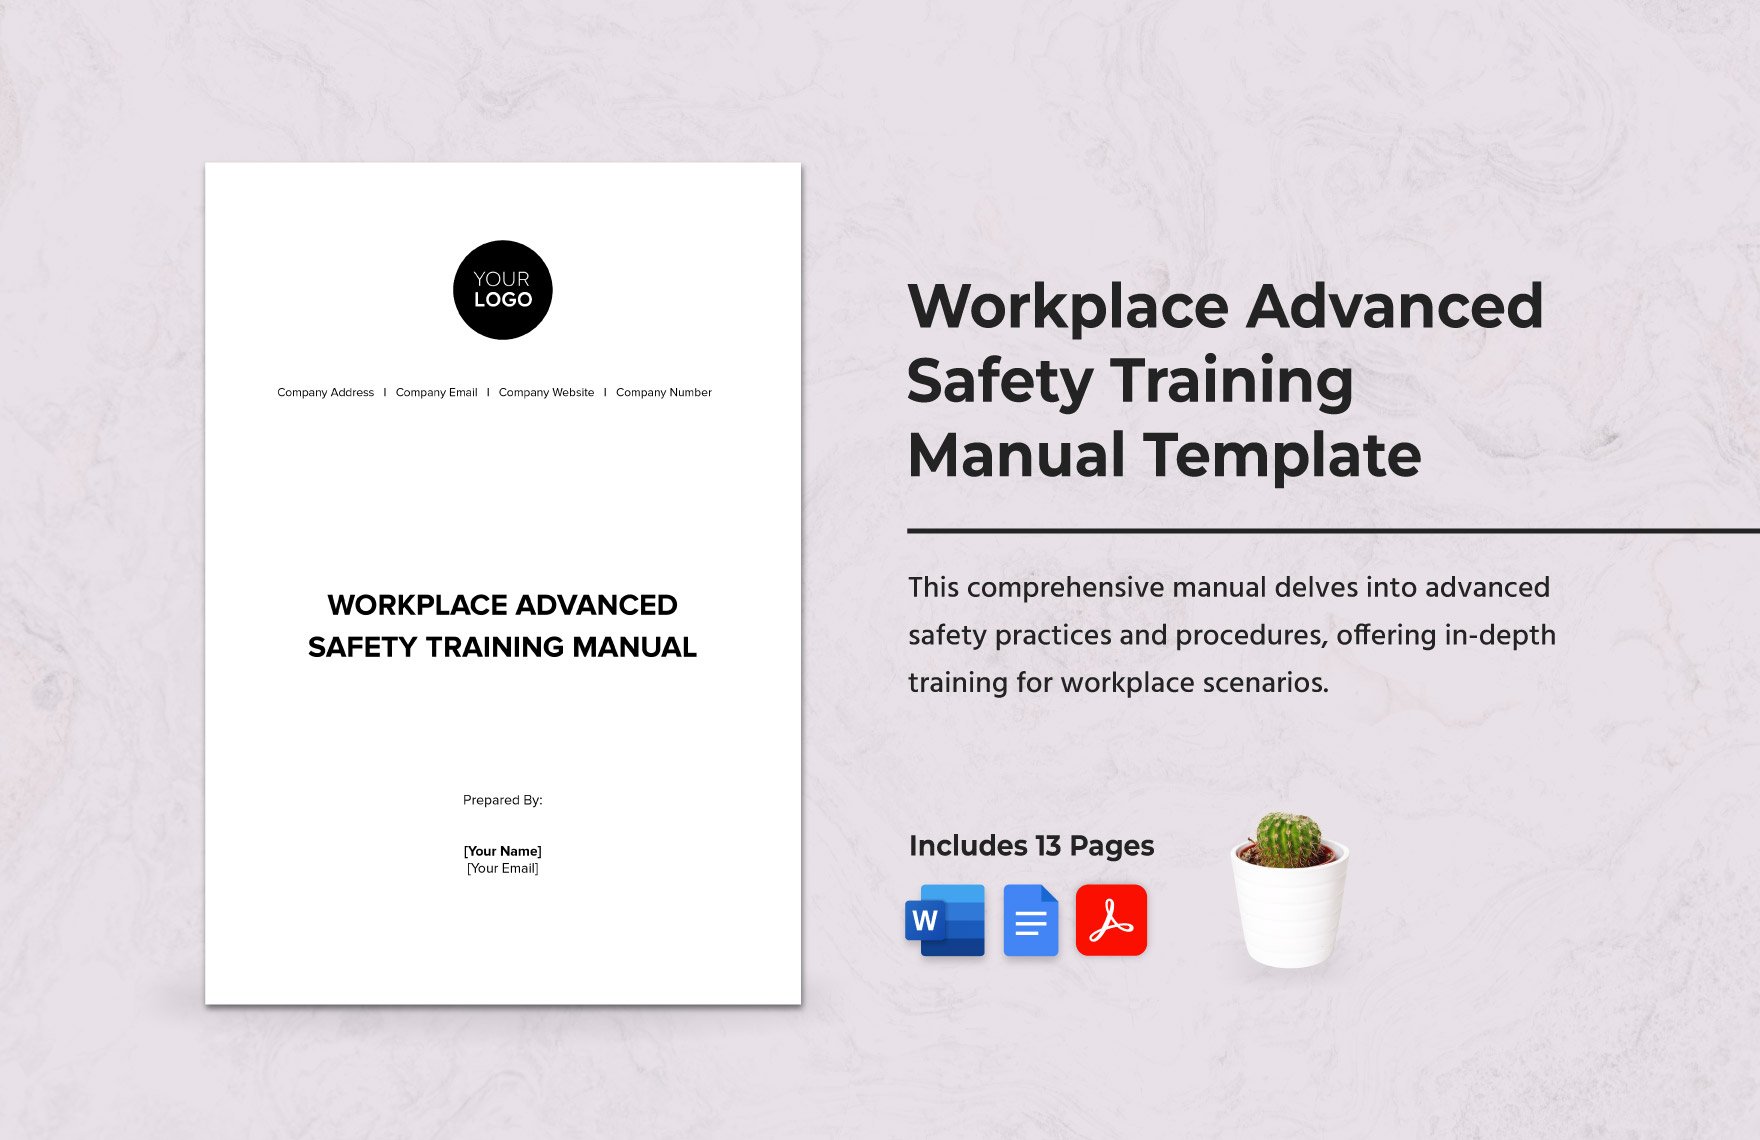 Workplace Advanced Safety Training Manual Template in Word, Google Docs, PDF